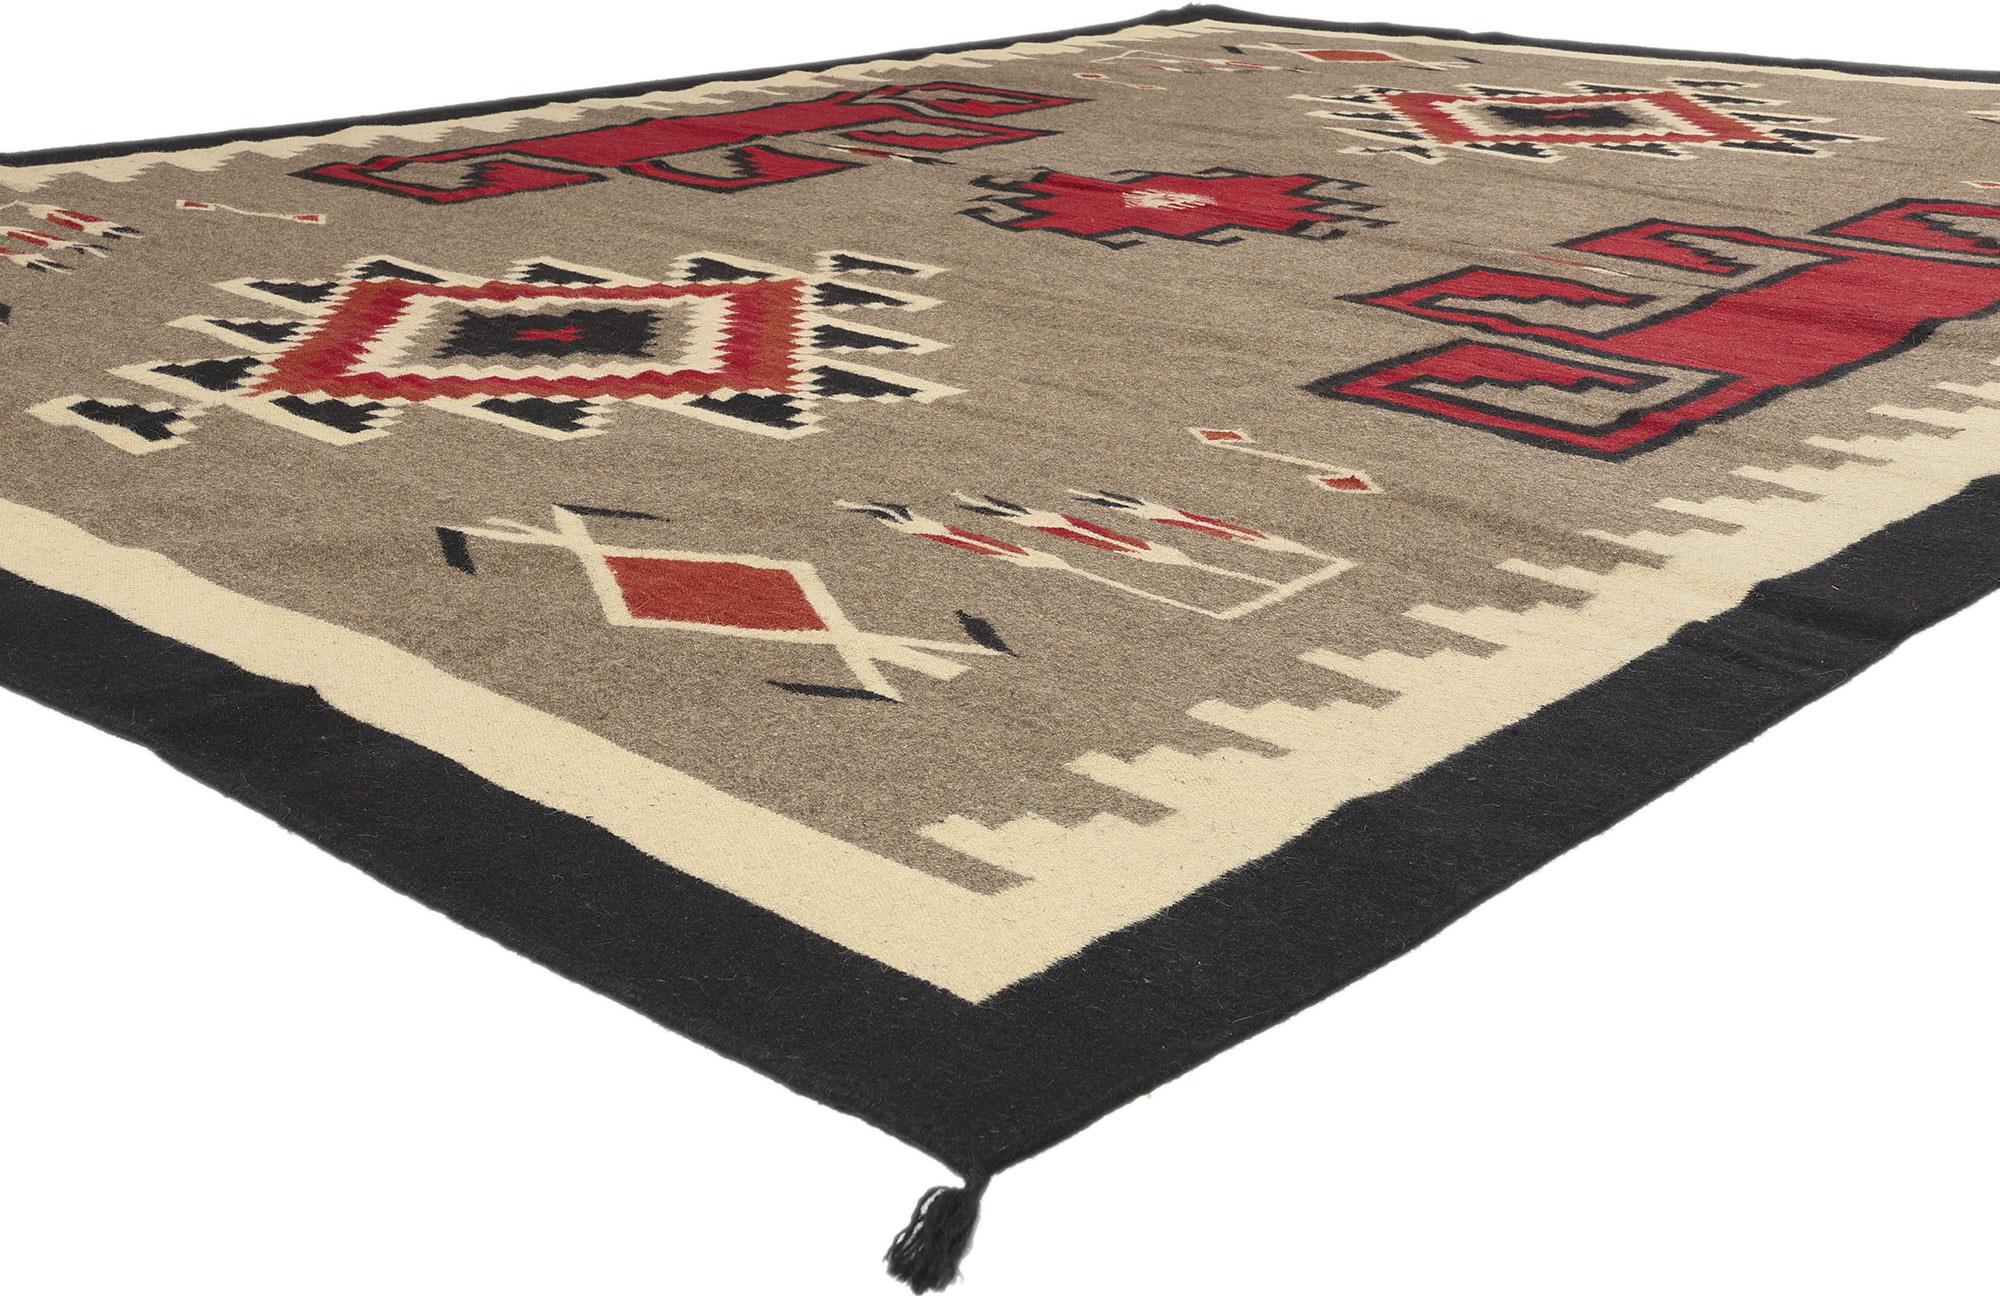 81038 Southwest Modern Teec Nos Pos Navajo-Style Rug, 09'01 x 12'02. Embark on a journey through the harmonious blend of Modern style and Southwest aesthetics with this meticulously handwoven Teec Nos Pos Navajo-style rug. Teec Nos Pos, celebrated